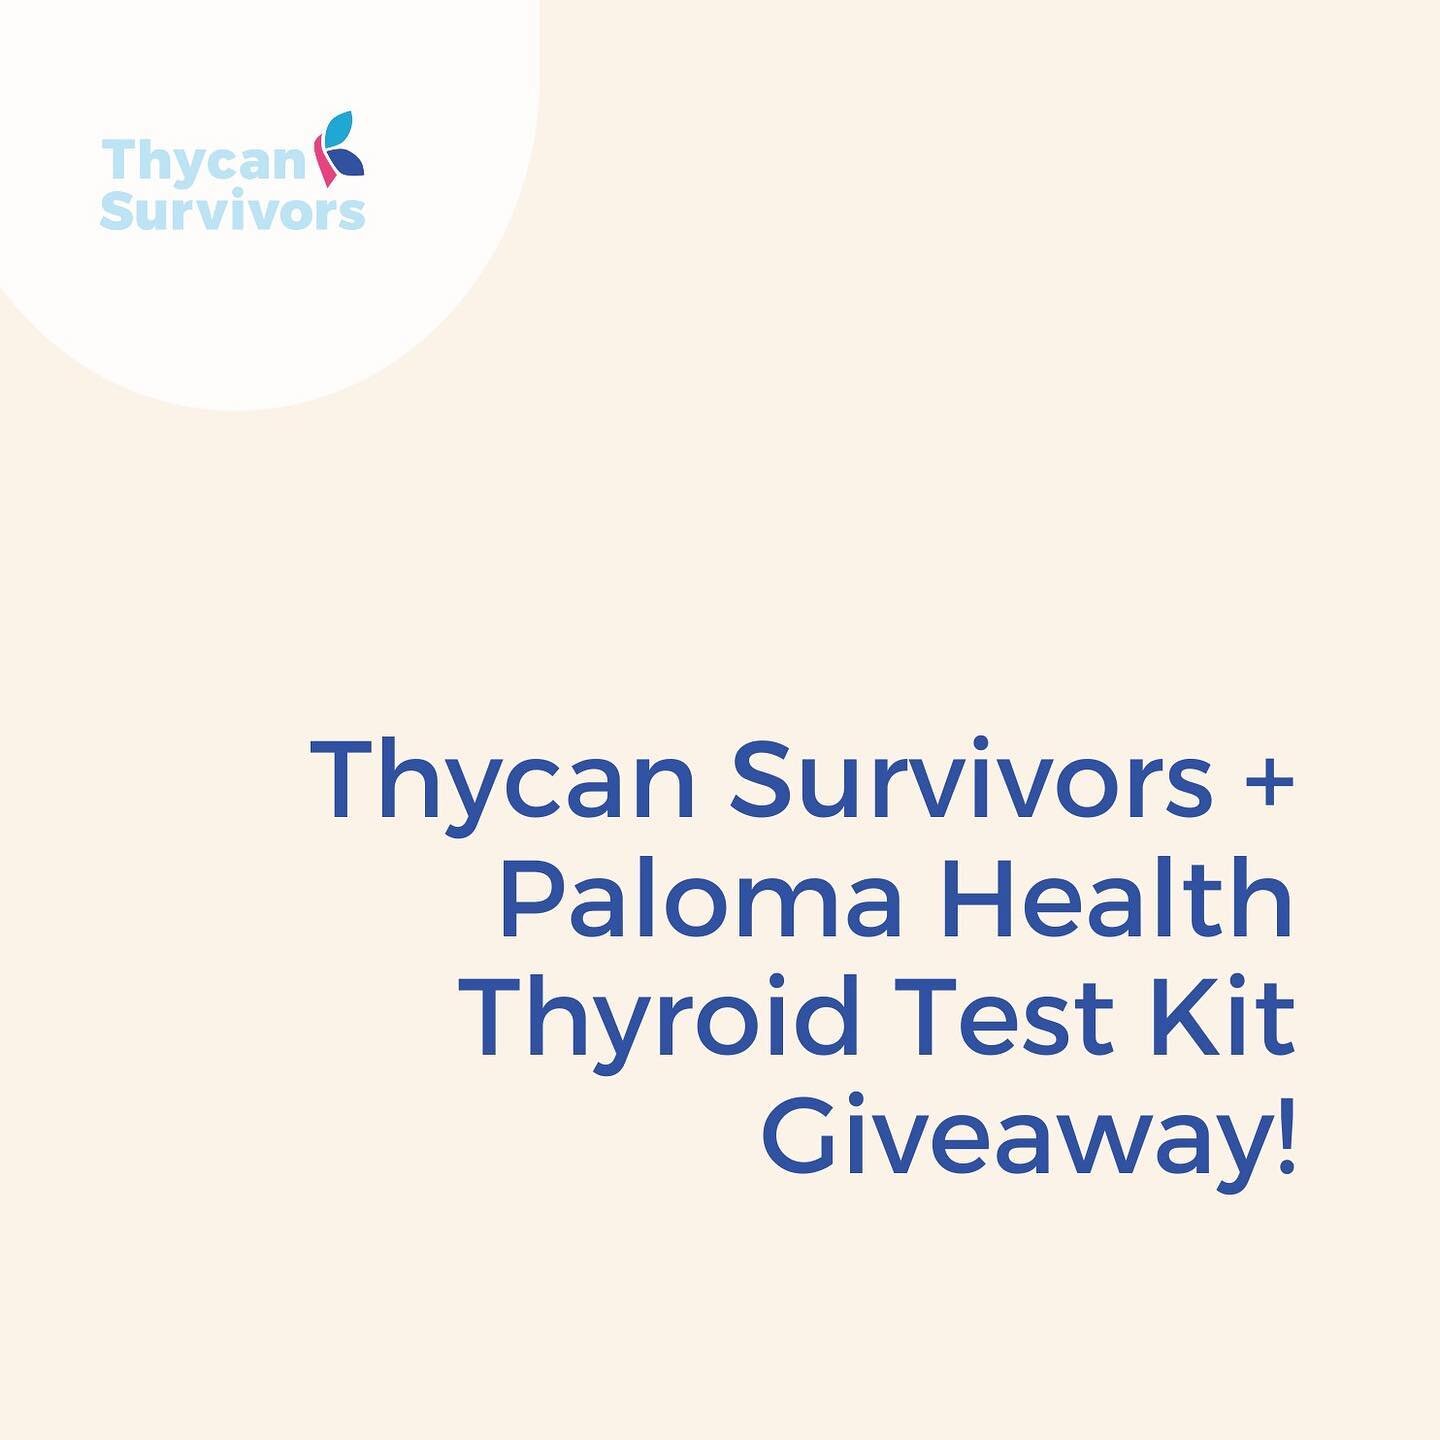 So excited to partner with @palomahealth again to give someone the opportunity to put their thyroid health in their own hands!! 

HERE&rsquo;S HOW:
1. Make sure you&rsquo;re subscribed to @thycan_survivors 
2. Comment an emoji below that describes ho